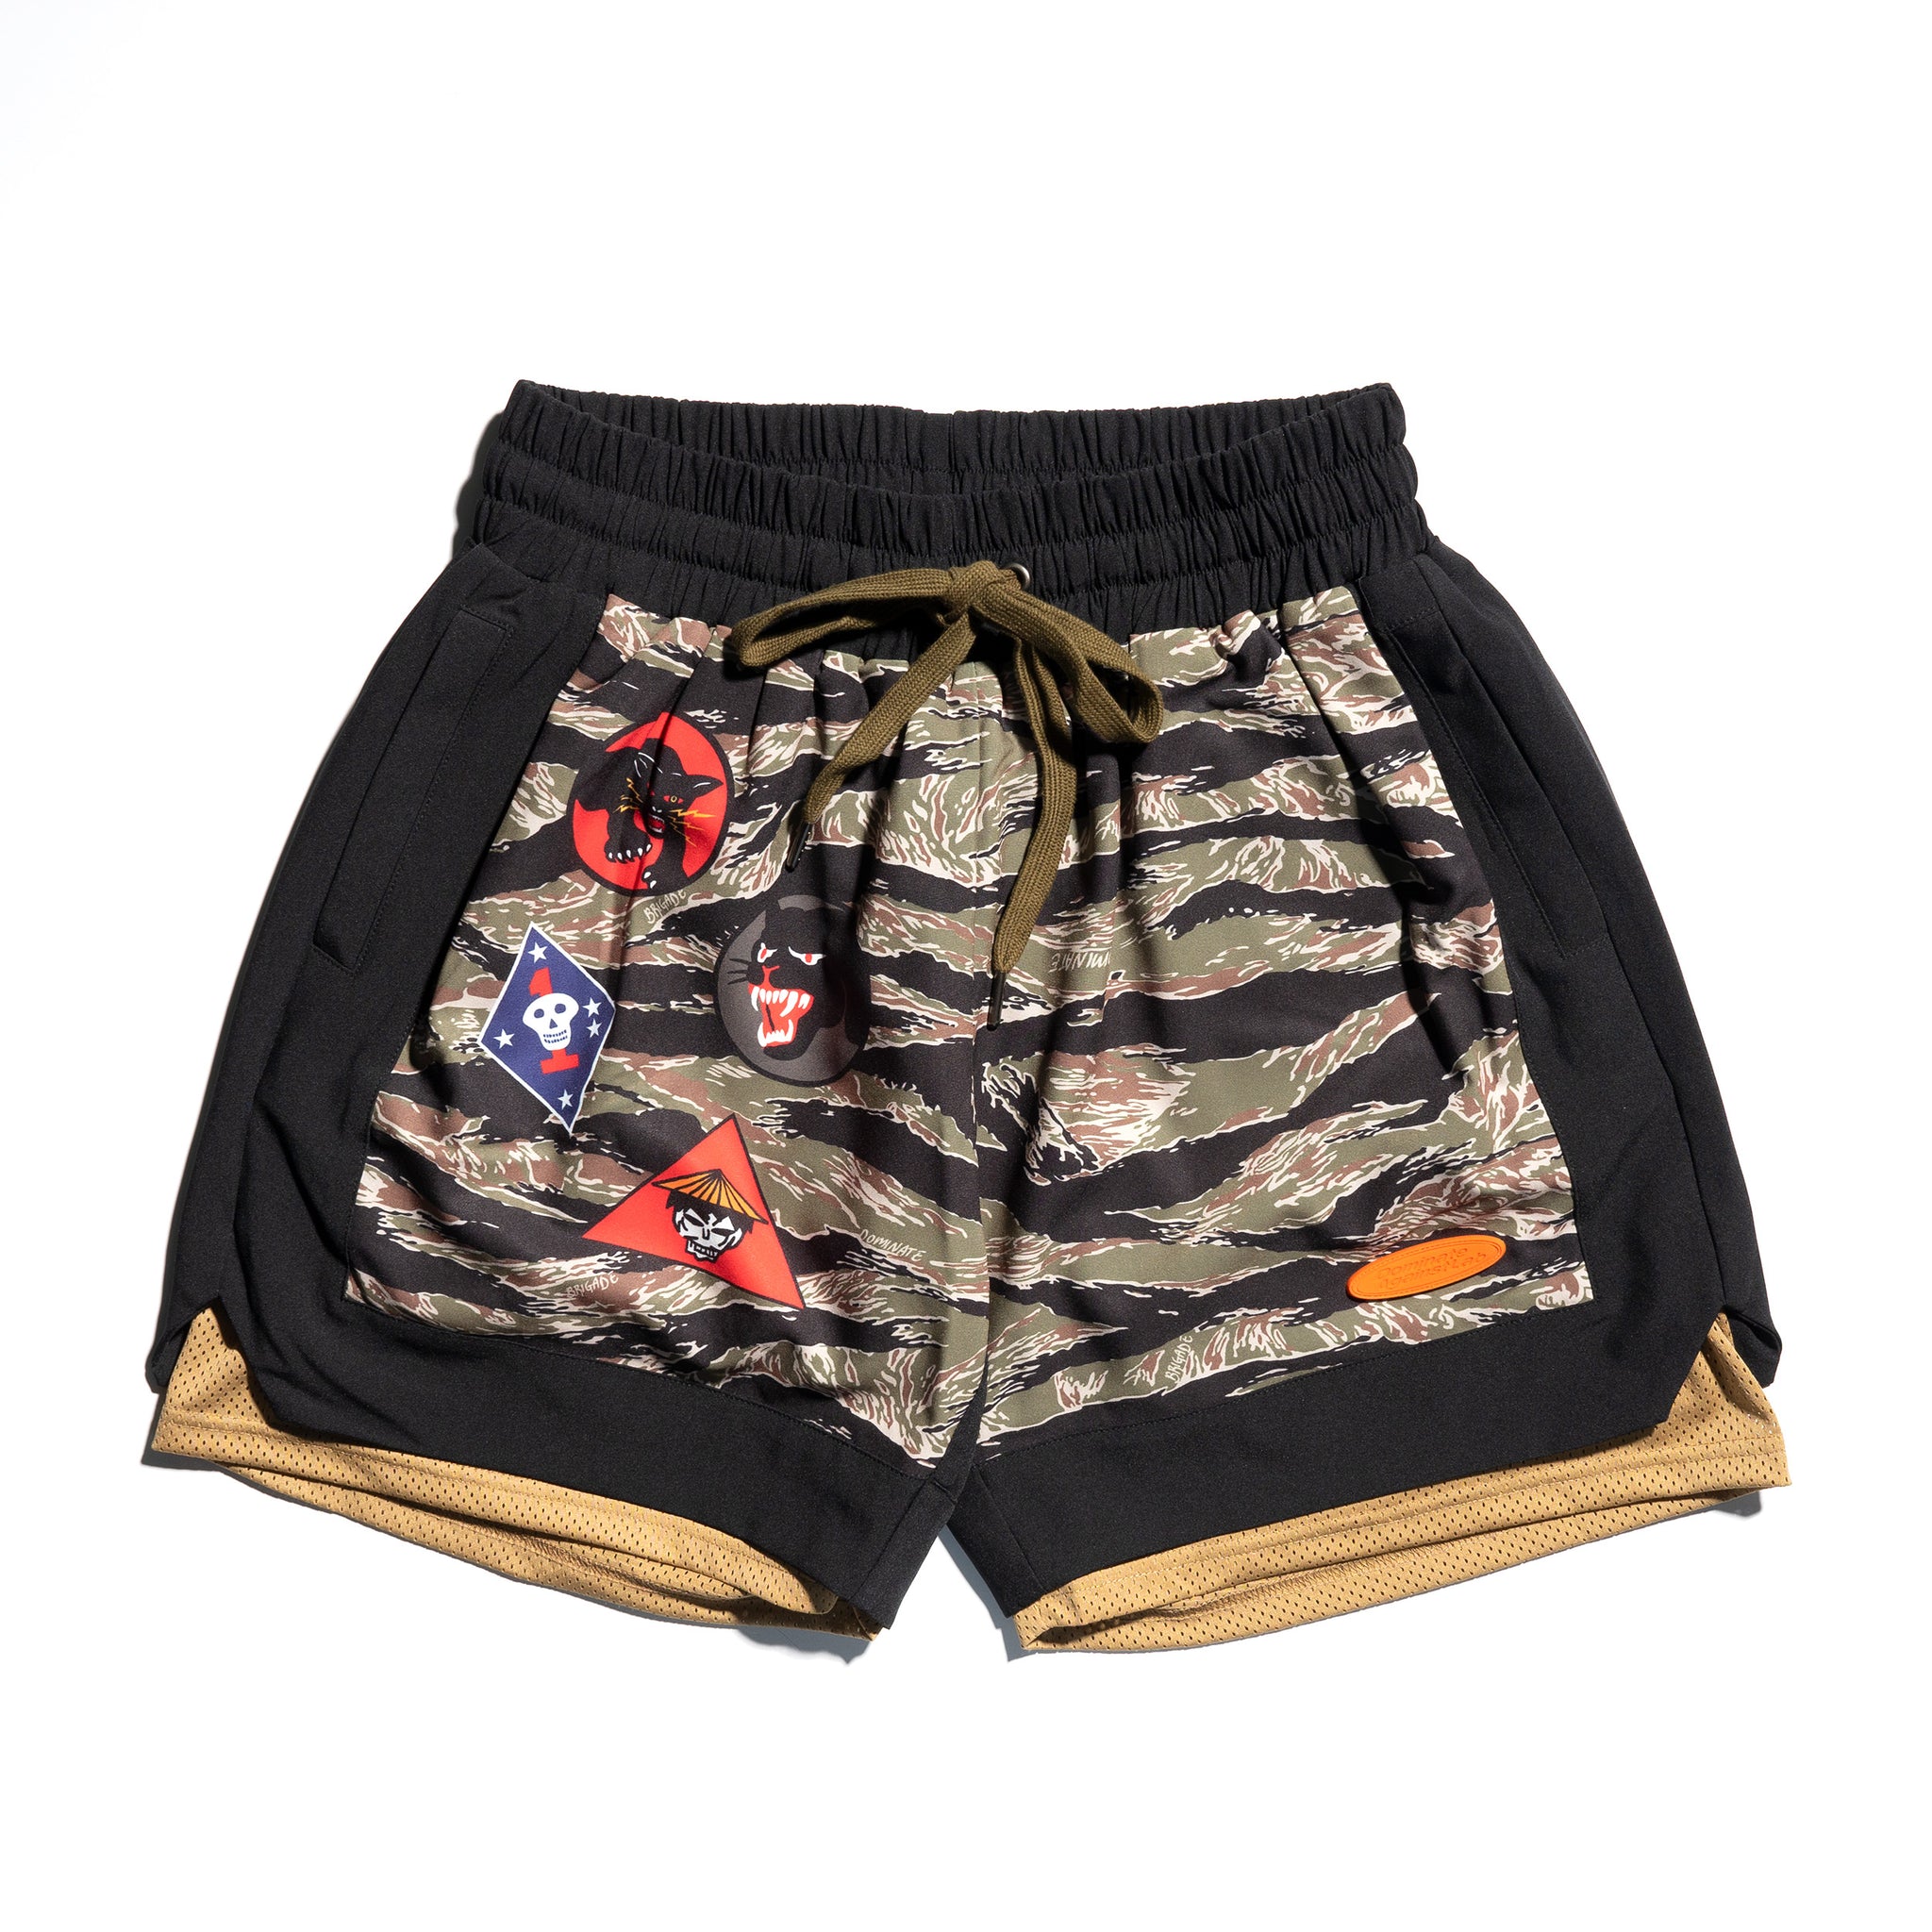 AGAINST X DOMINATE PATCH BALL SHORTS